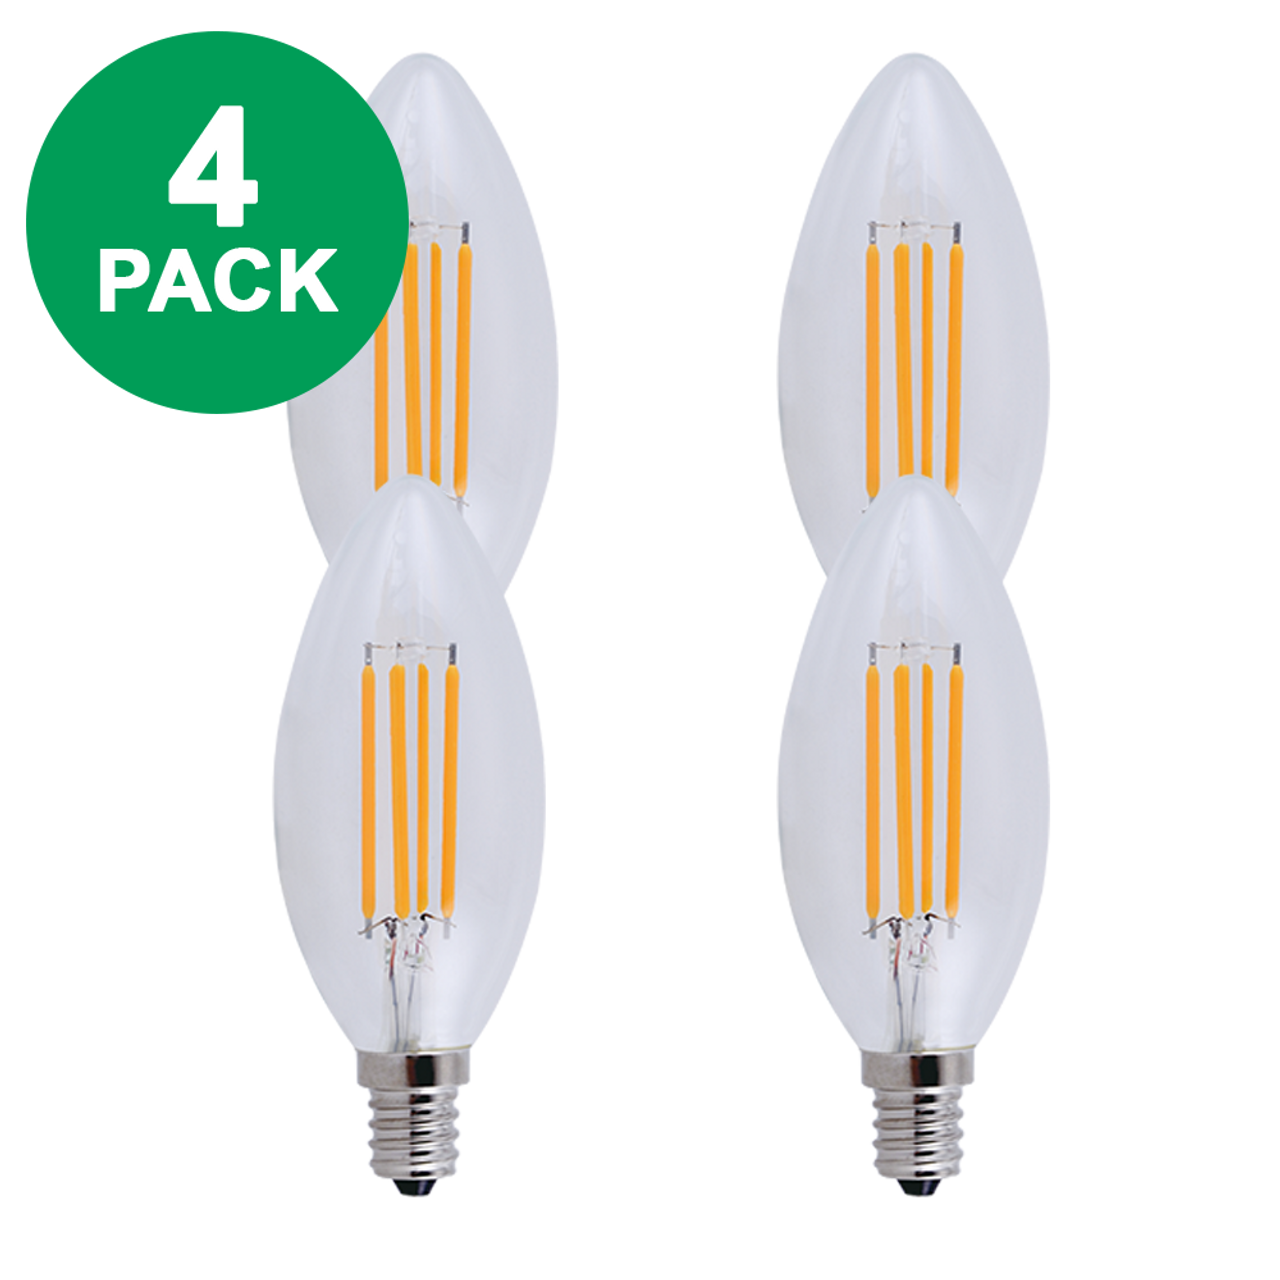 4 Pack Candelabra with Filament